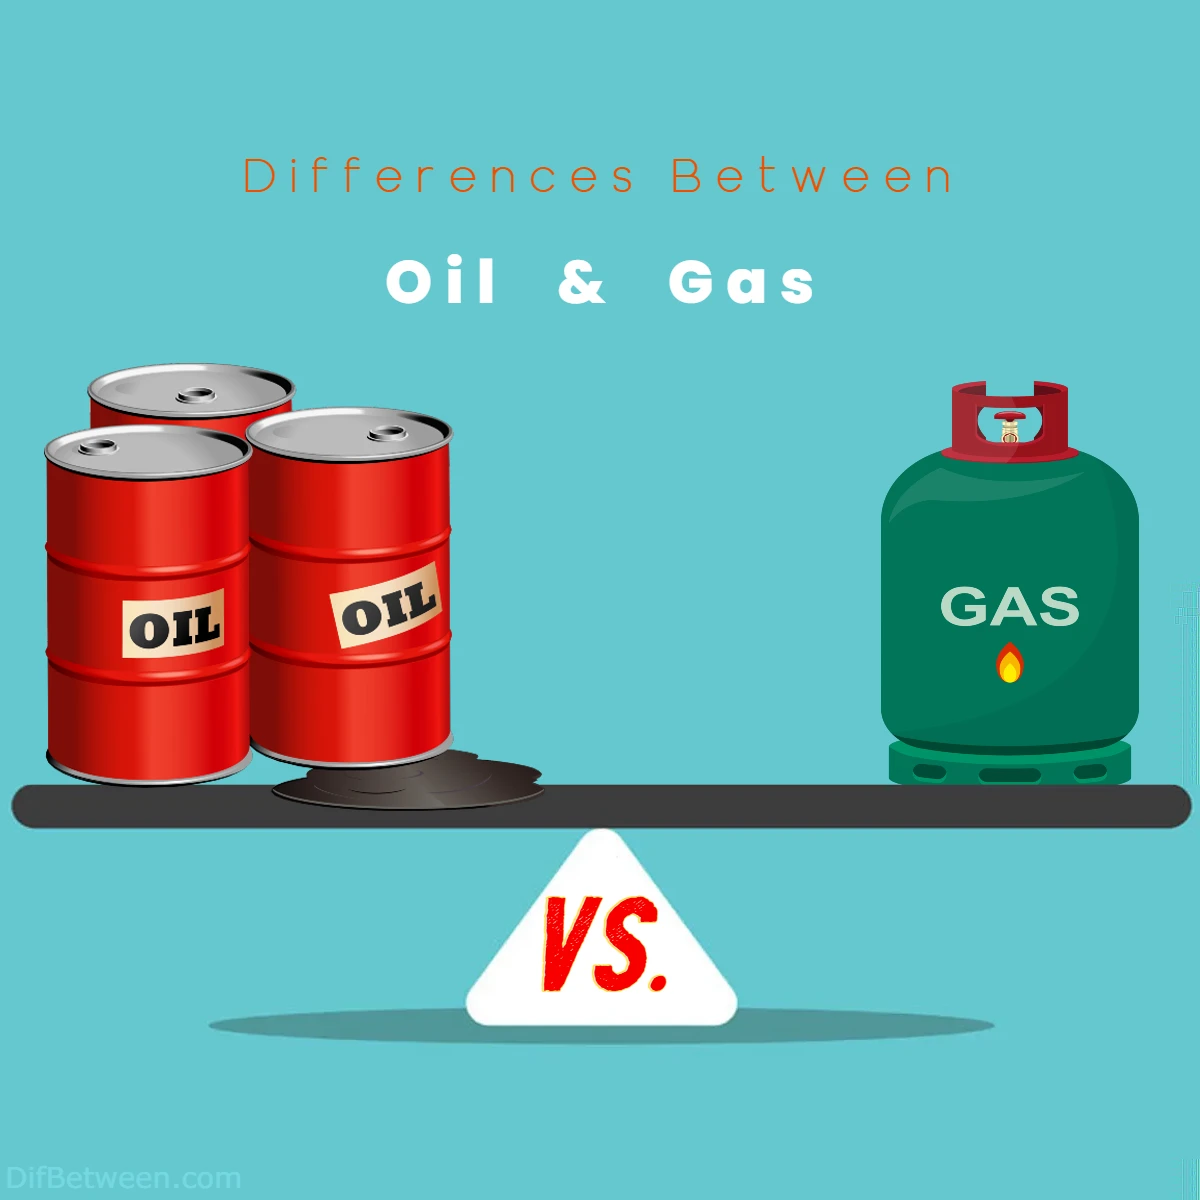 Differences Between Oil vs Gas